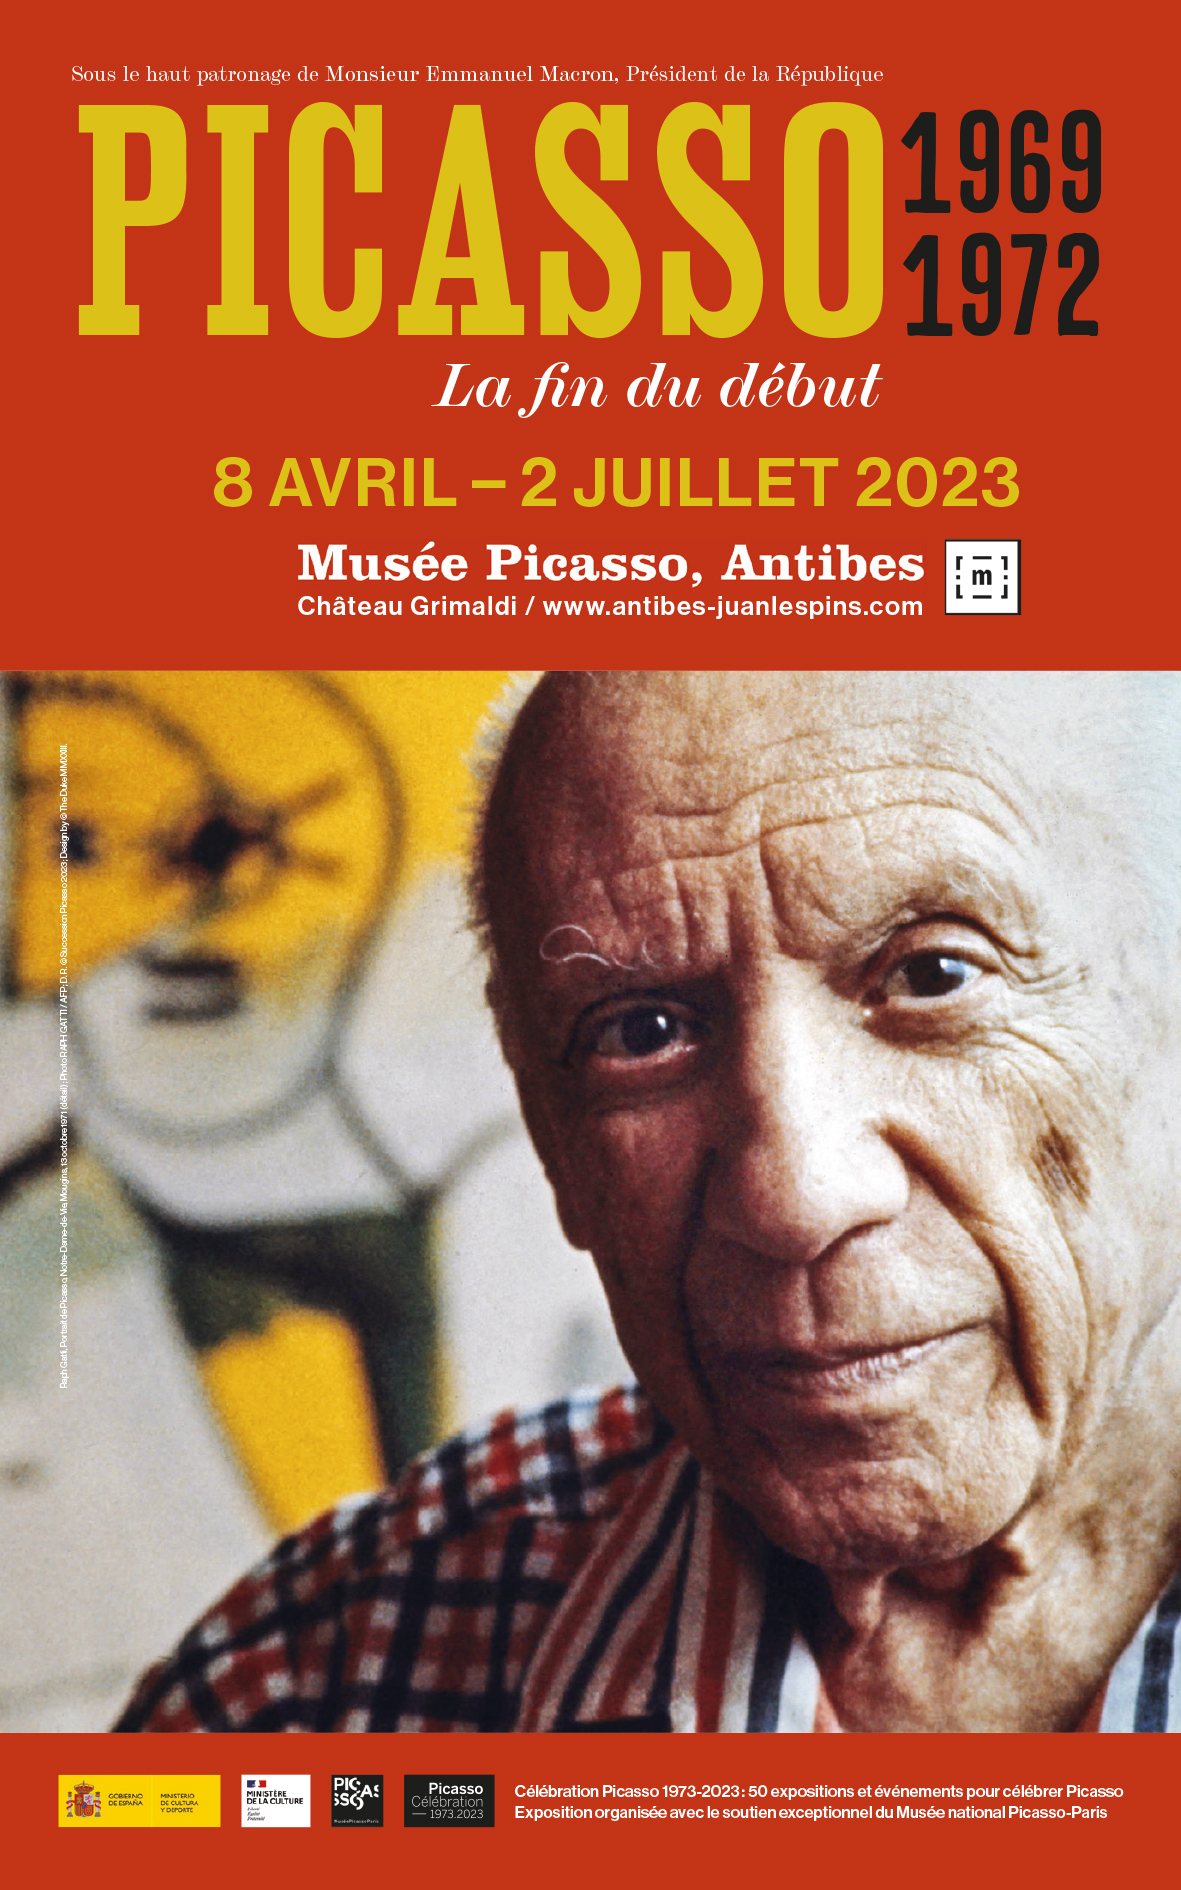 Picasso 1969-1972 Musée Picasso Antibes 8 avril - 2 juillet 2023